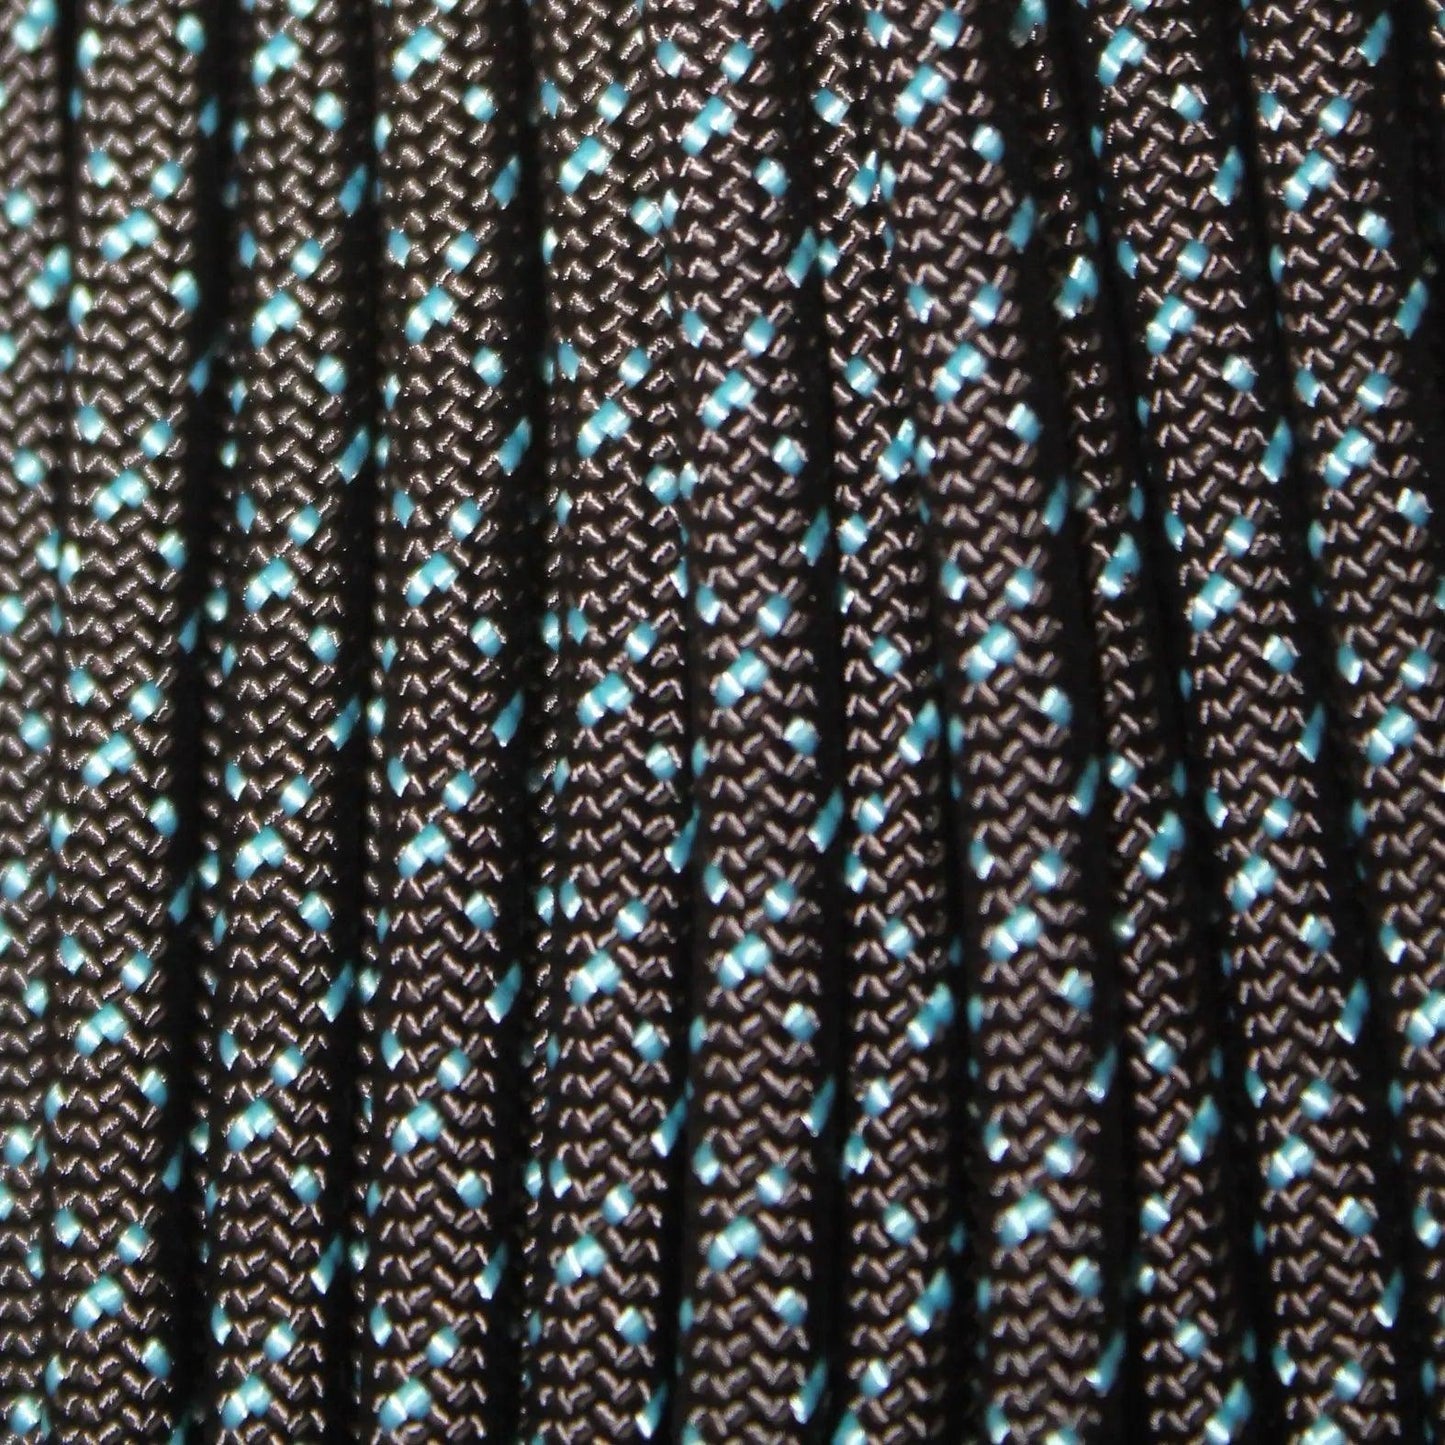 550 Paracord Starry Night-Black with Neon Turquoise Made in the USA Nylon/Nylon (100 FT.) - Paracord Galaxy